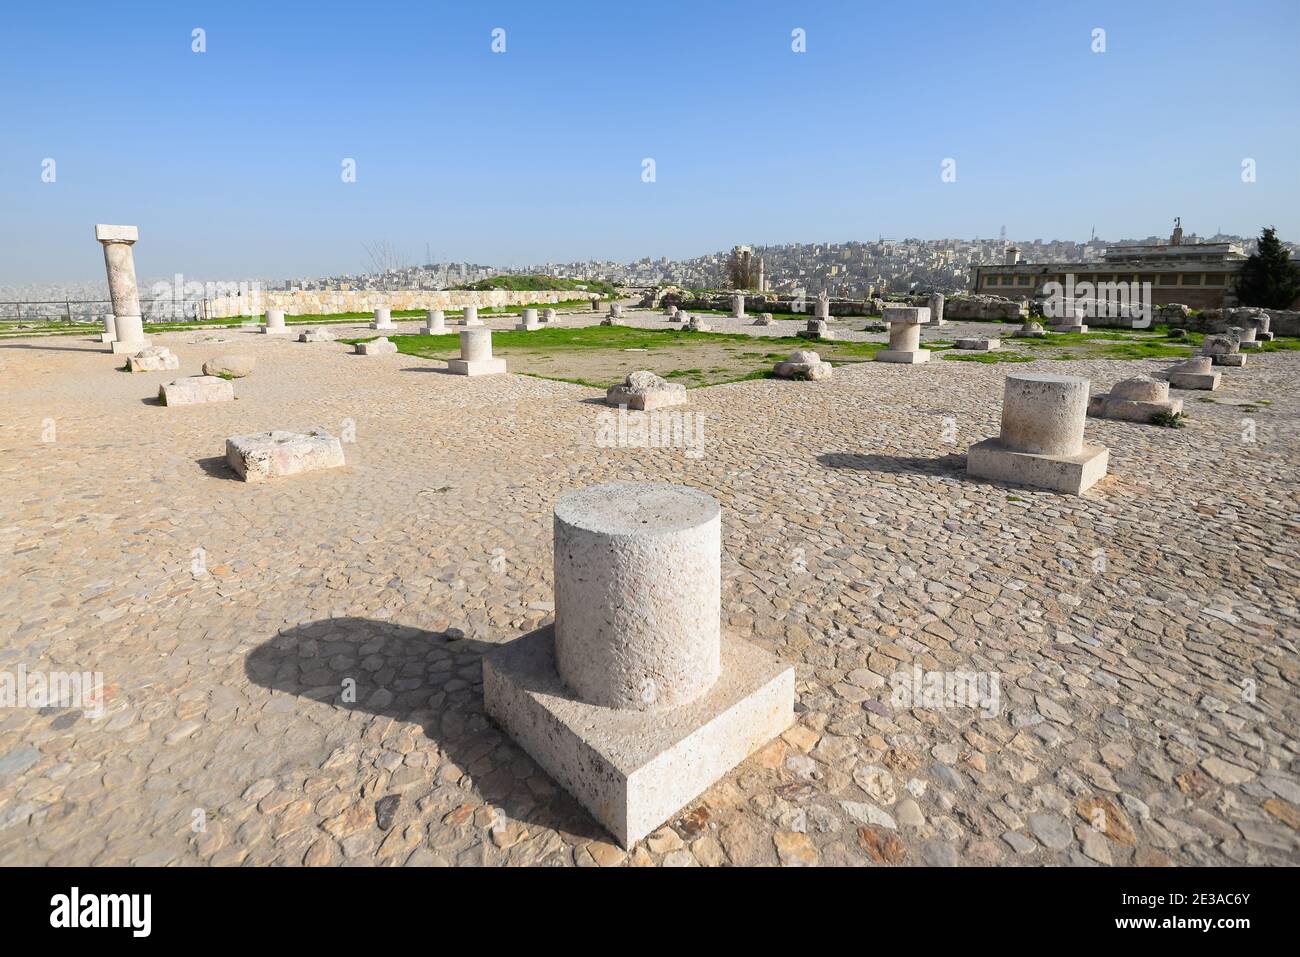 Remains of Umayyad Mosque in Amman Citadel, Jordan. Ancient columns in the Citadel of Amman in the Middle east. Stock Photo